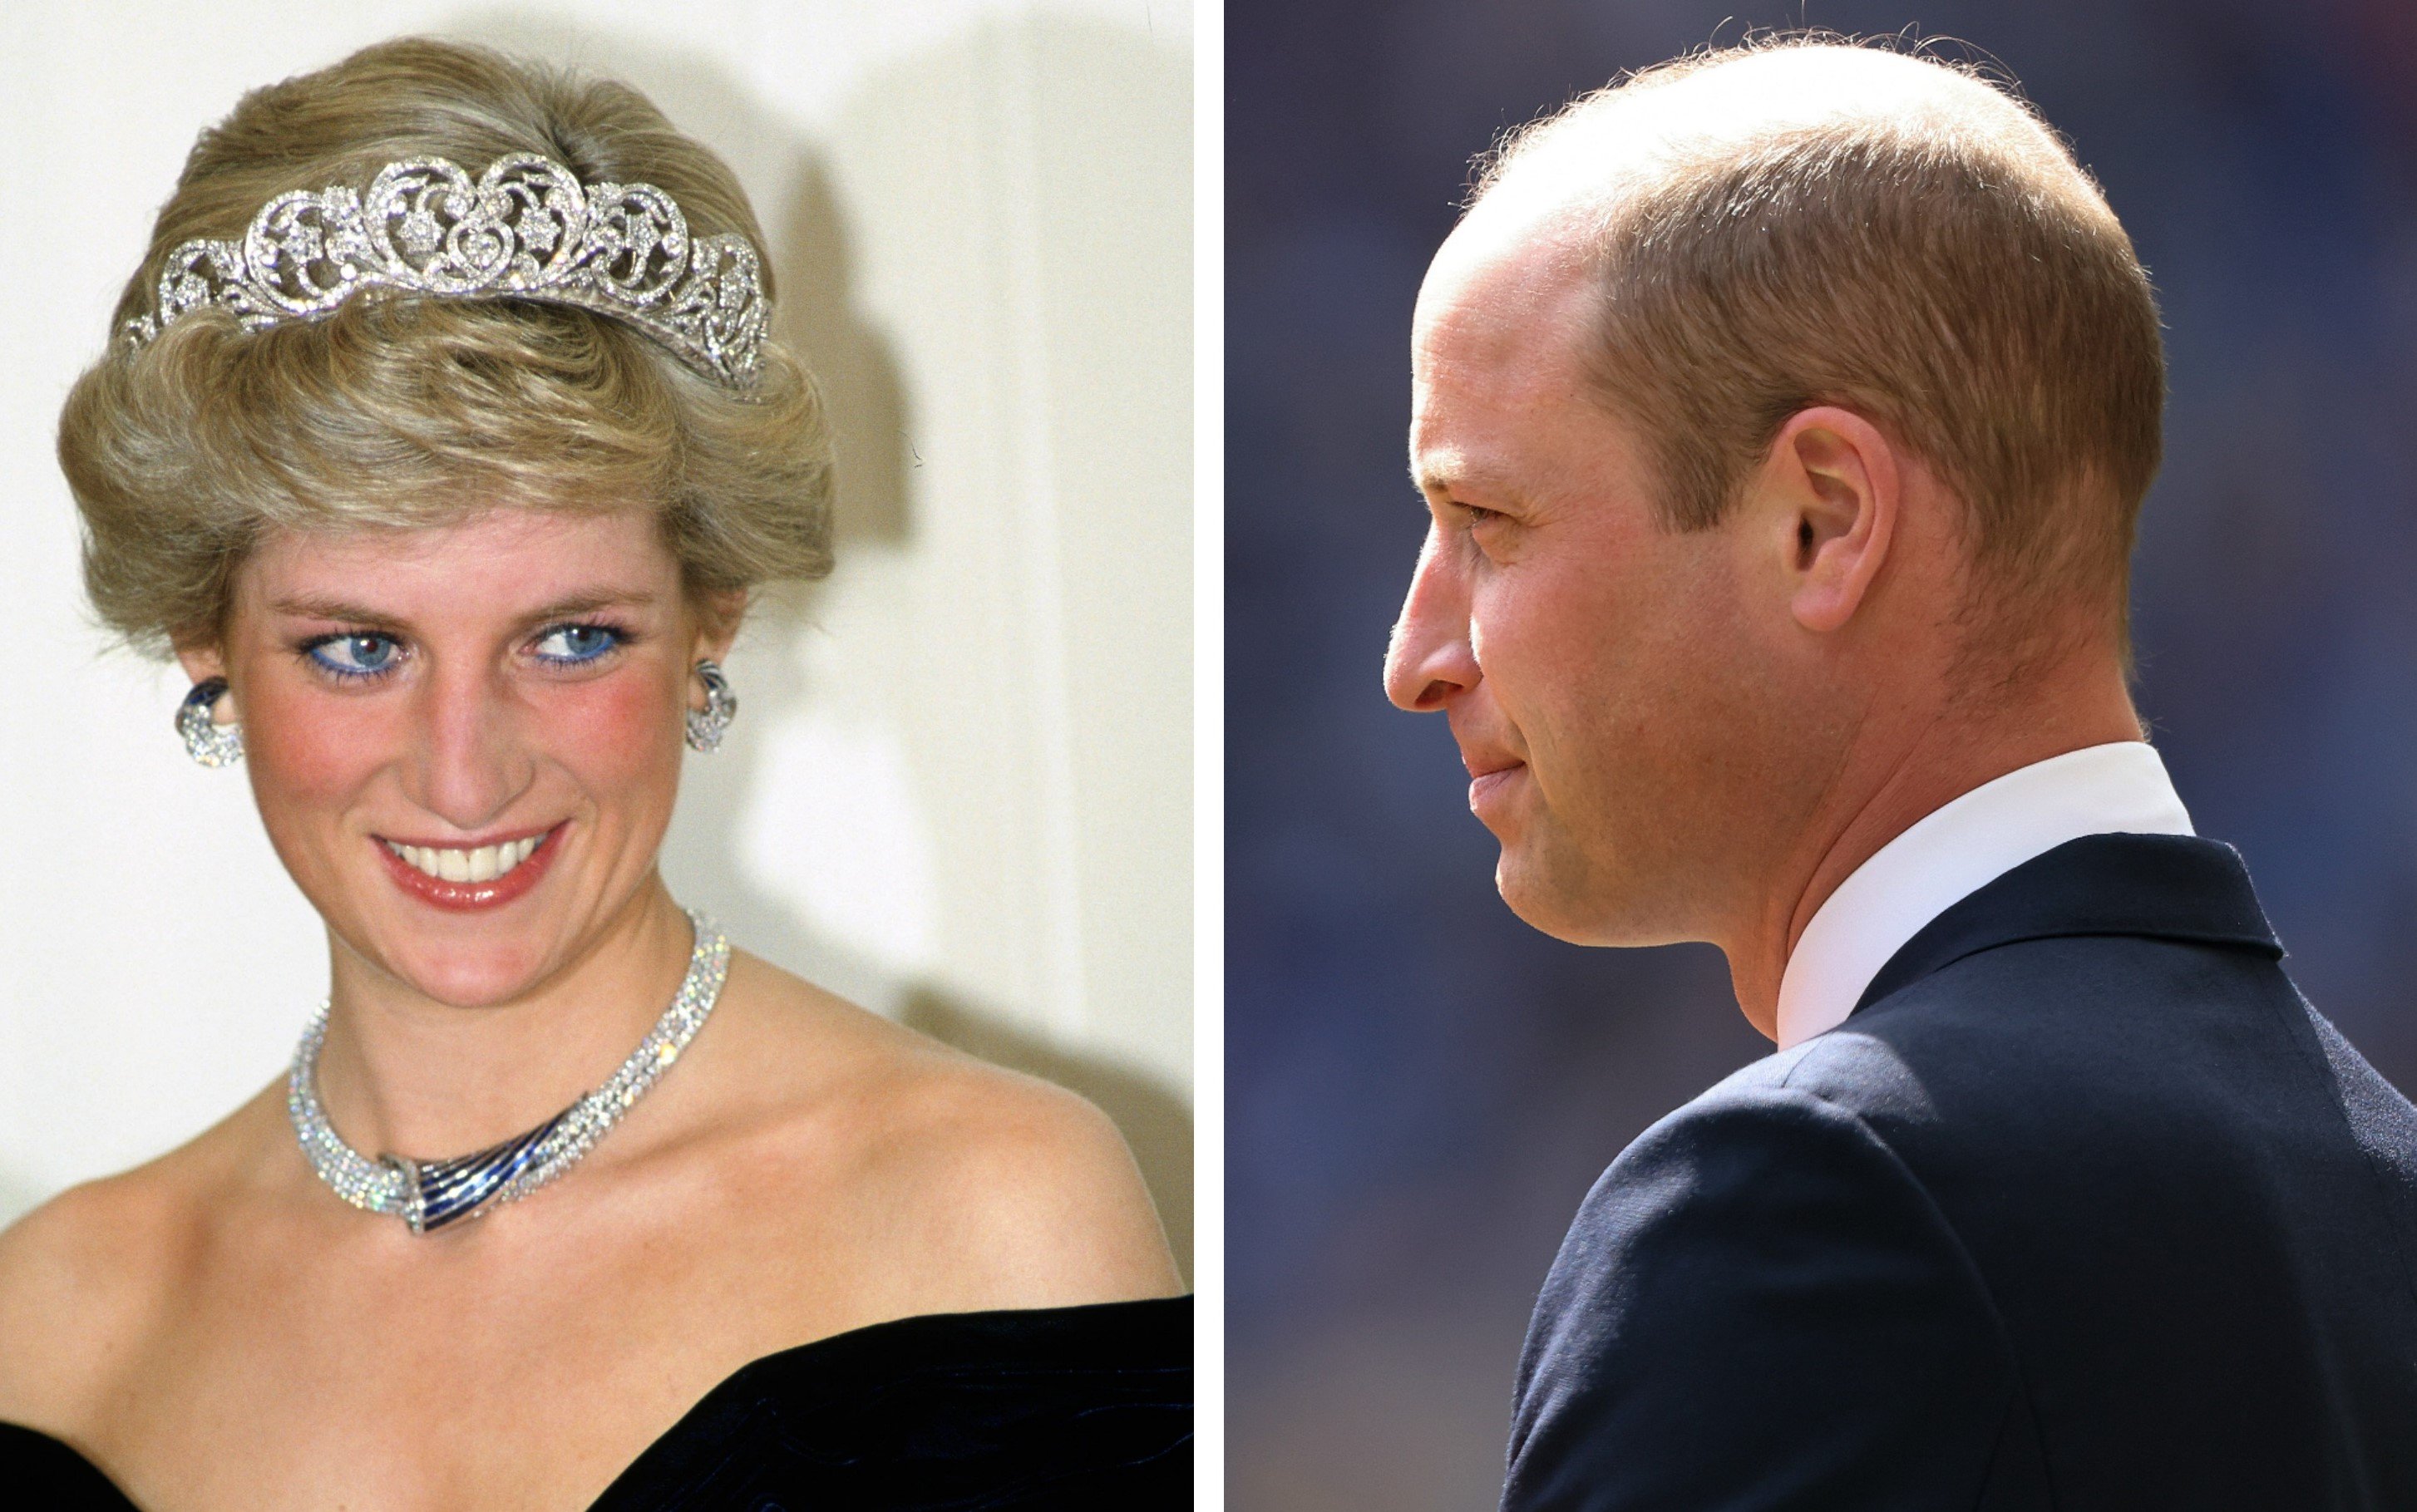 (L) Princess Diana, who a body language expert says Prince William sided with when he didn't bow to Camilla, at a banquet in Germany, (R): Prince William watching a soccer match in London